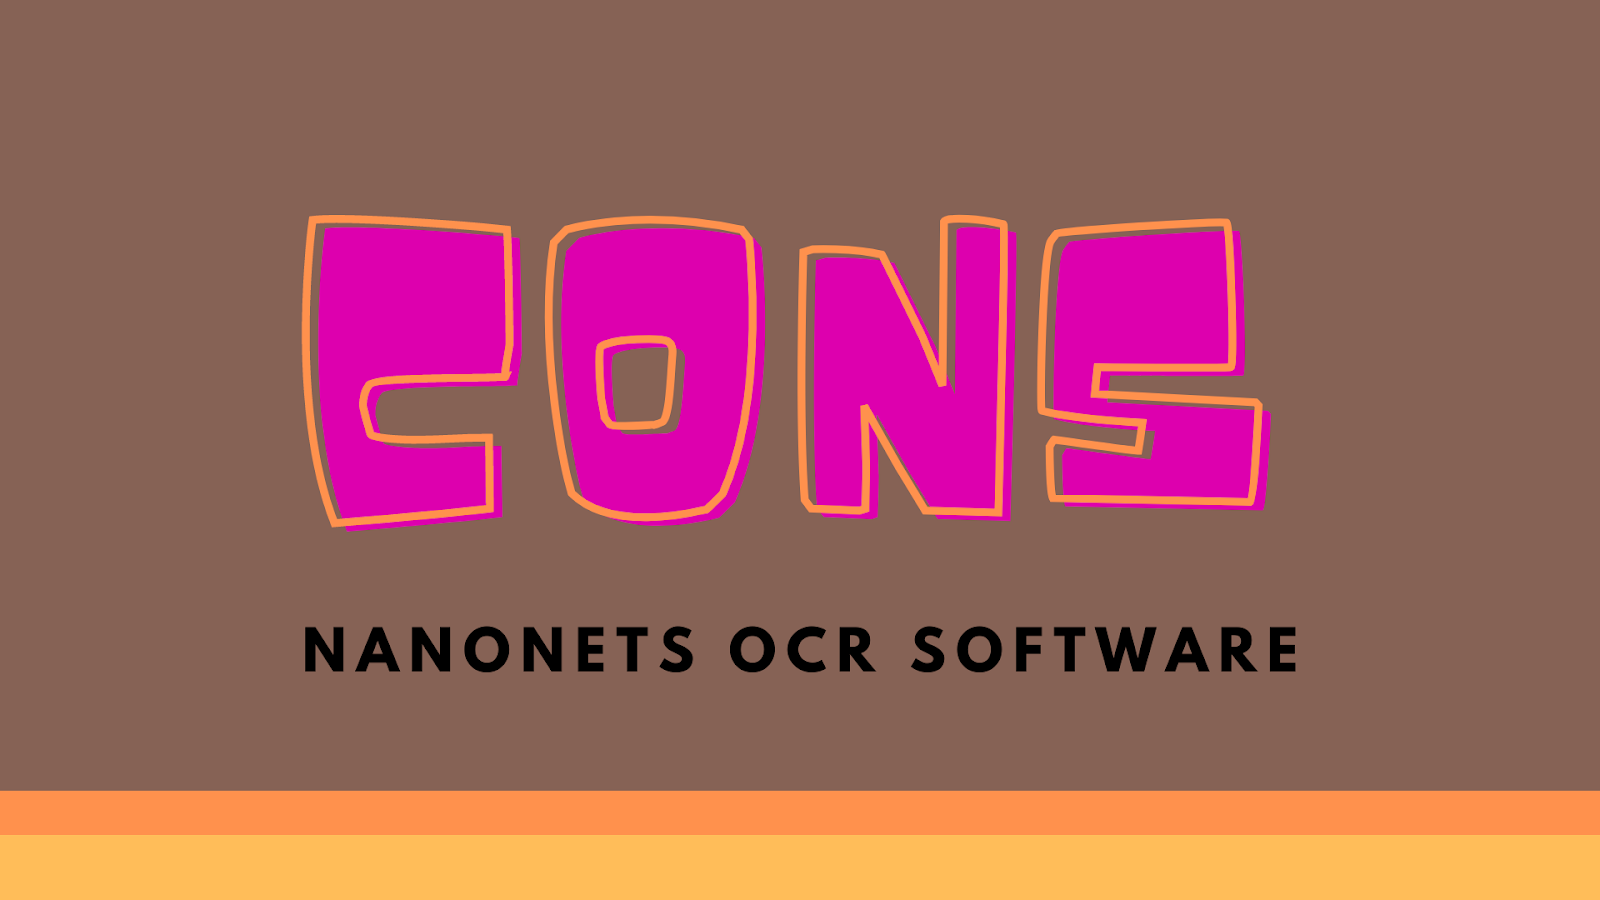 Cons Of Nanonets OCR Software